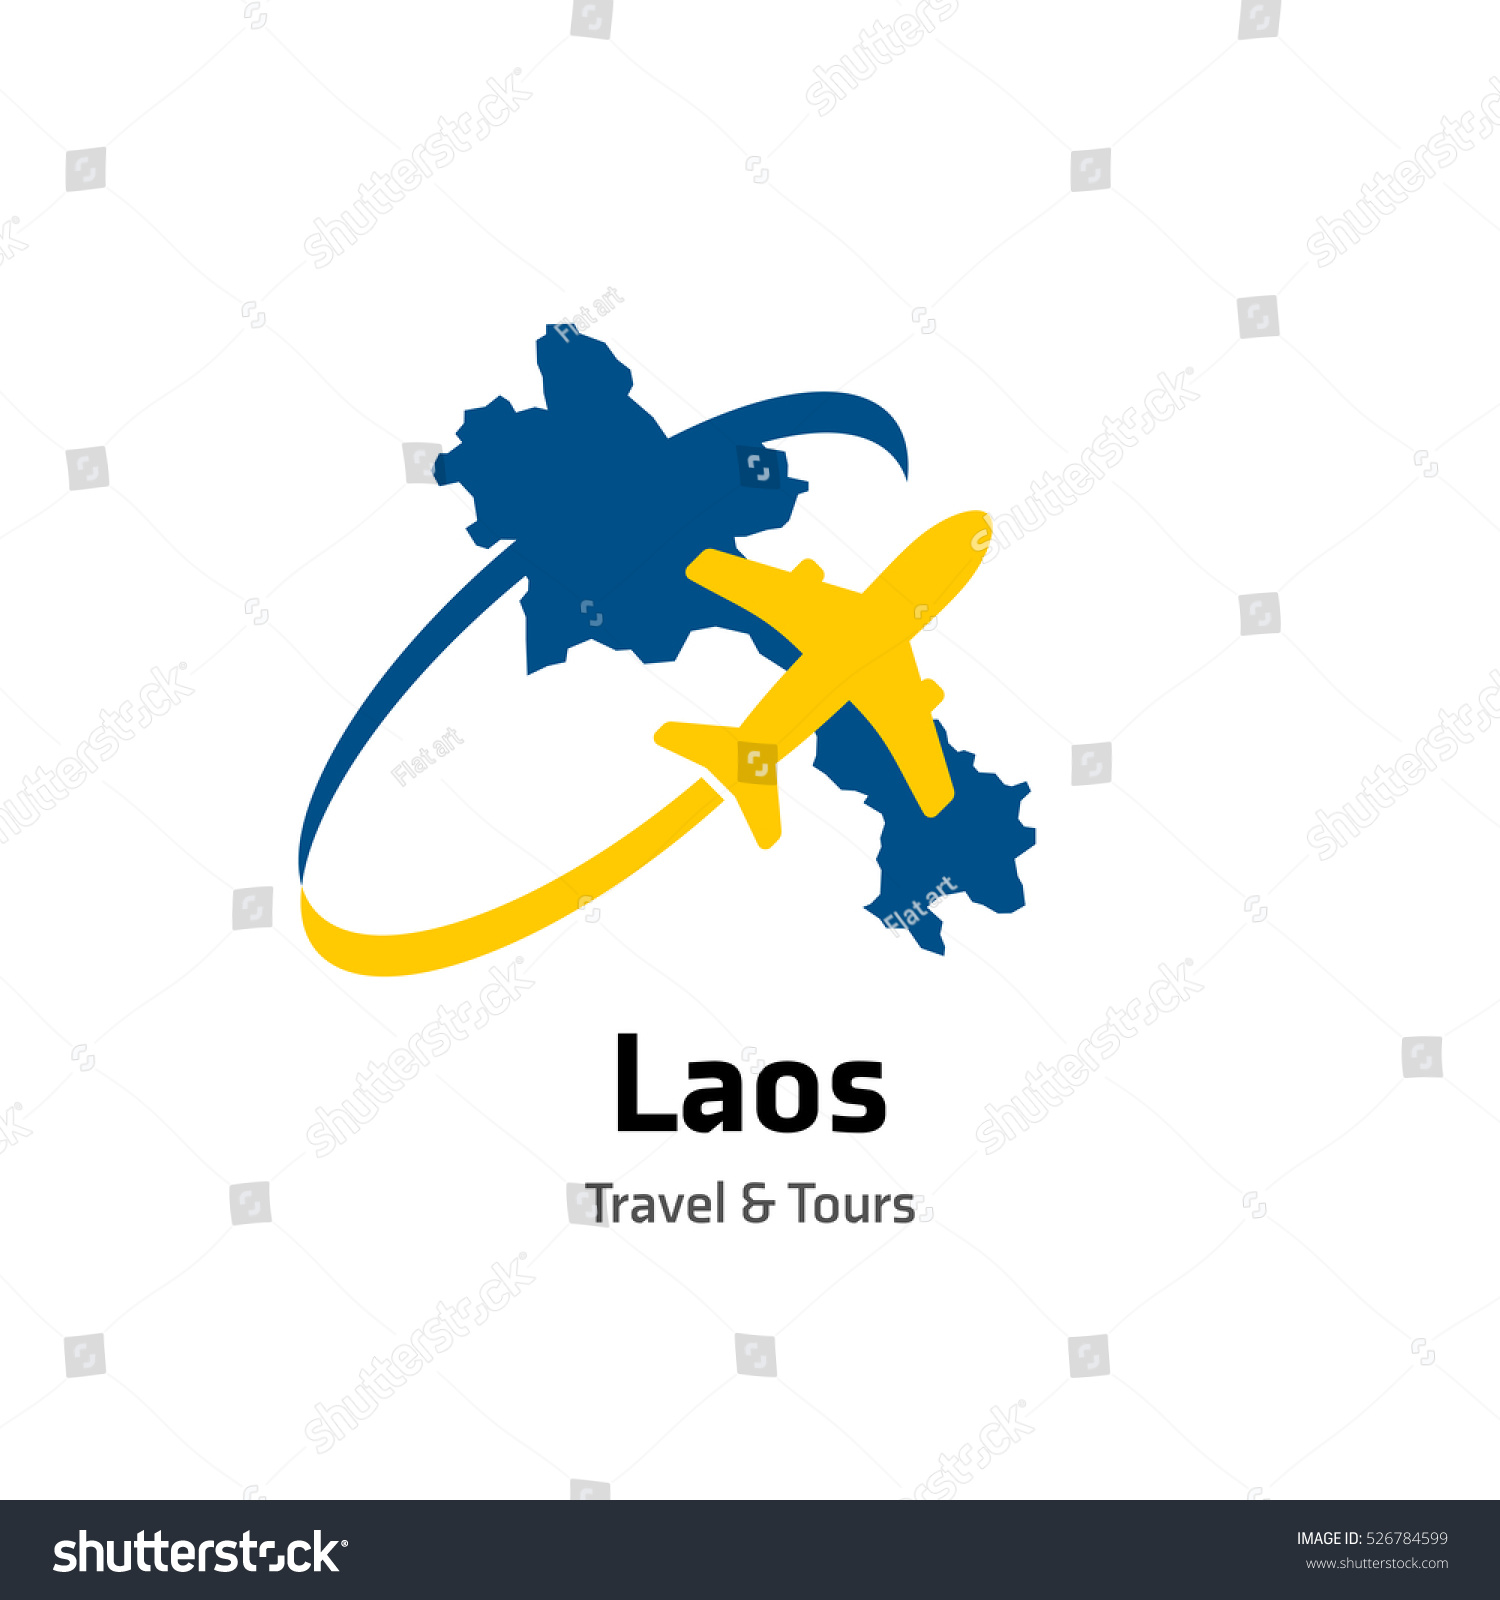 Image result for Laos Travel